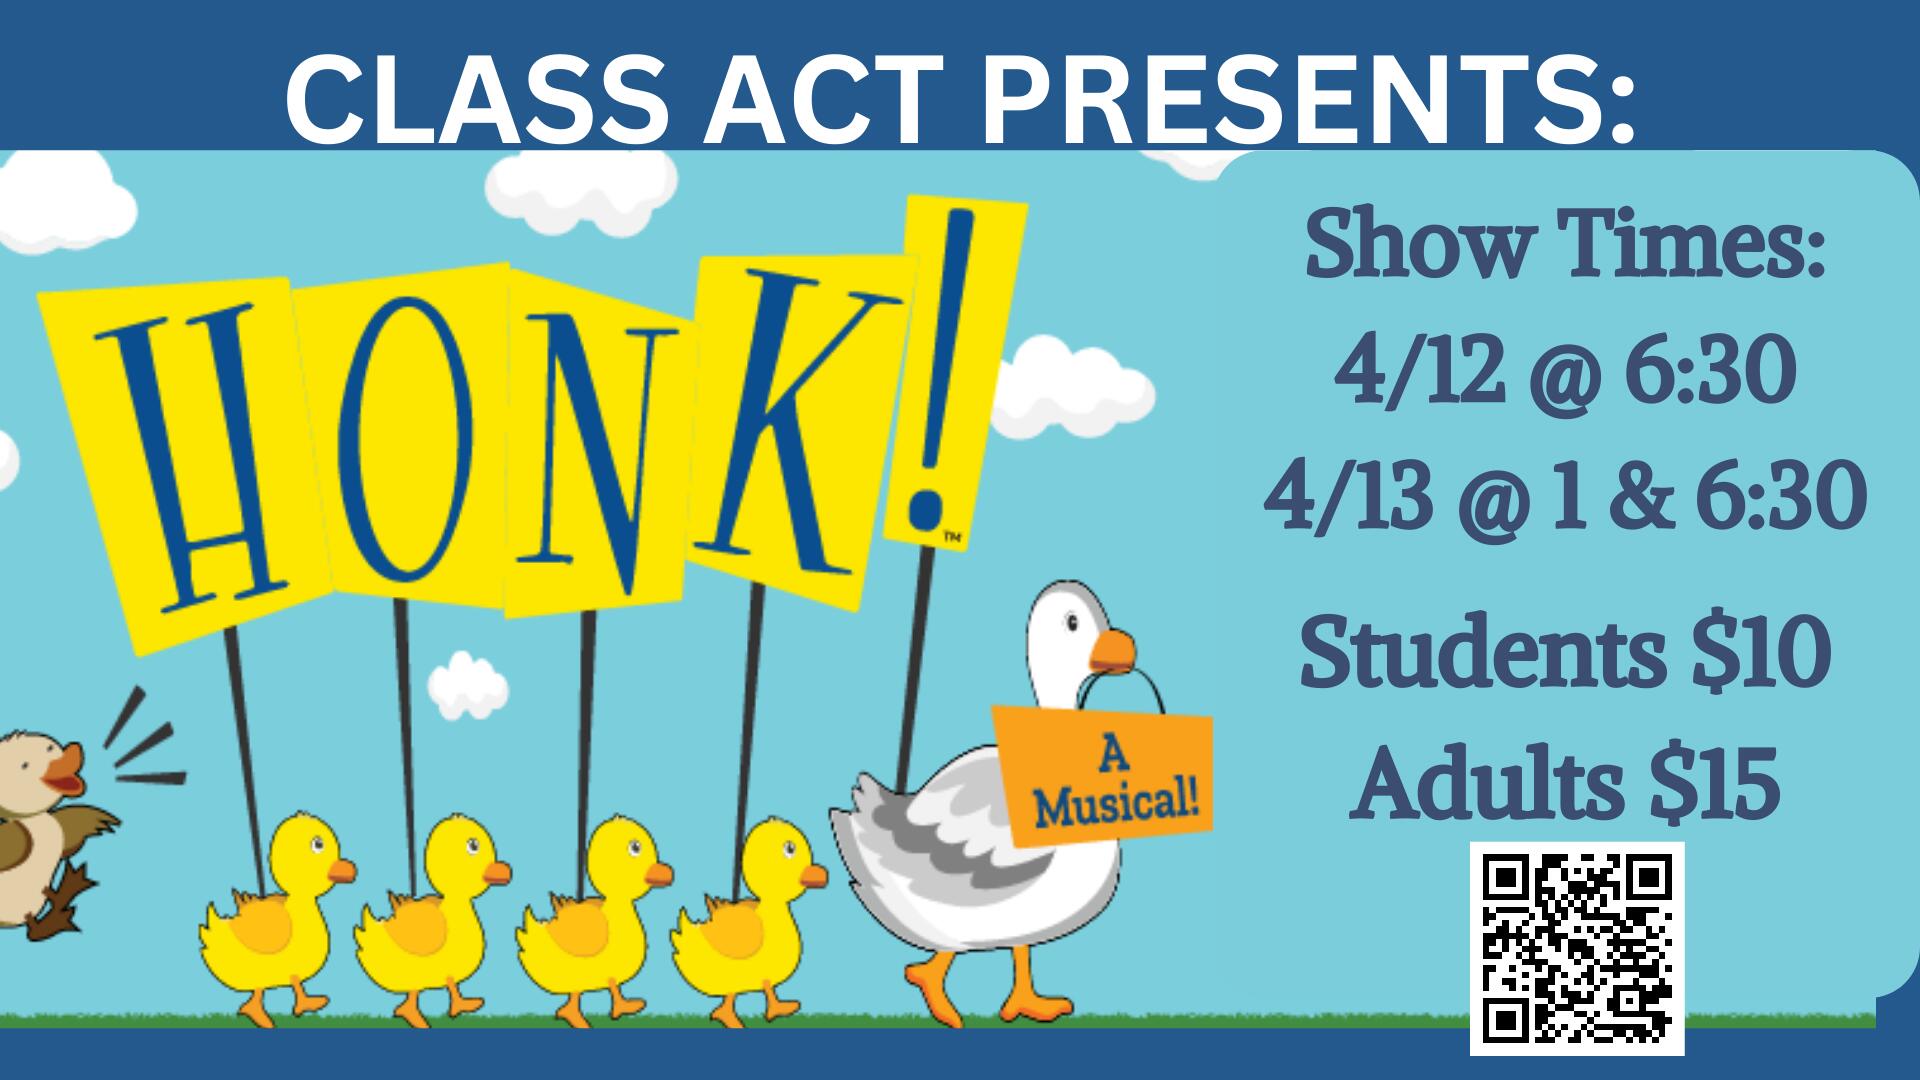 Class Act Presents: Honk! The Musica. April 12th and 13. To purchase tickets go to alvirneclassact.ludus.com